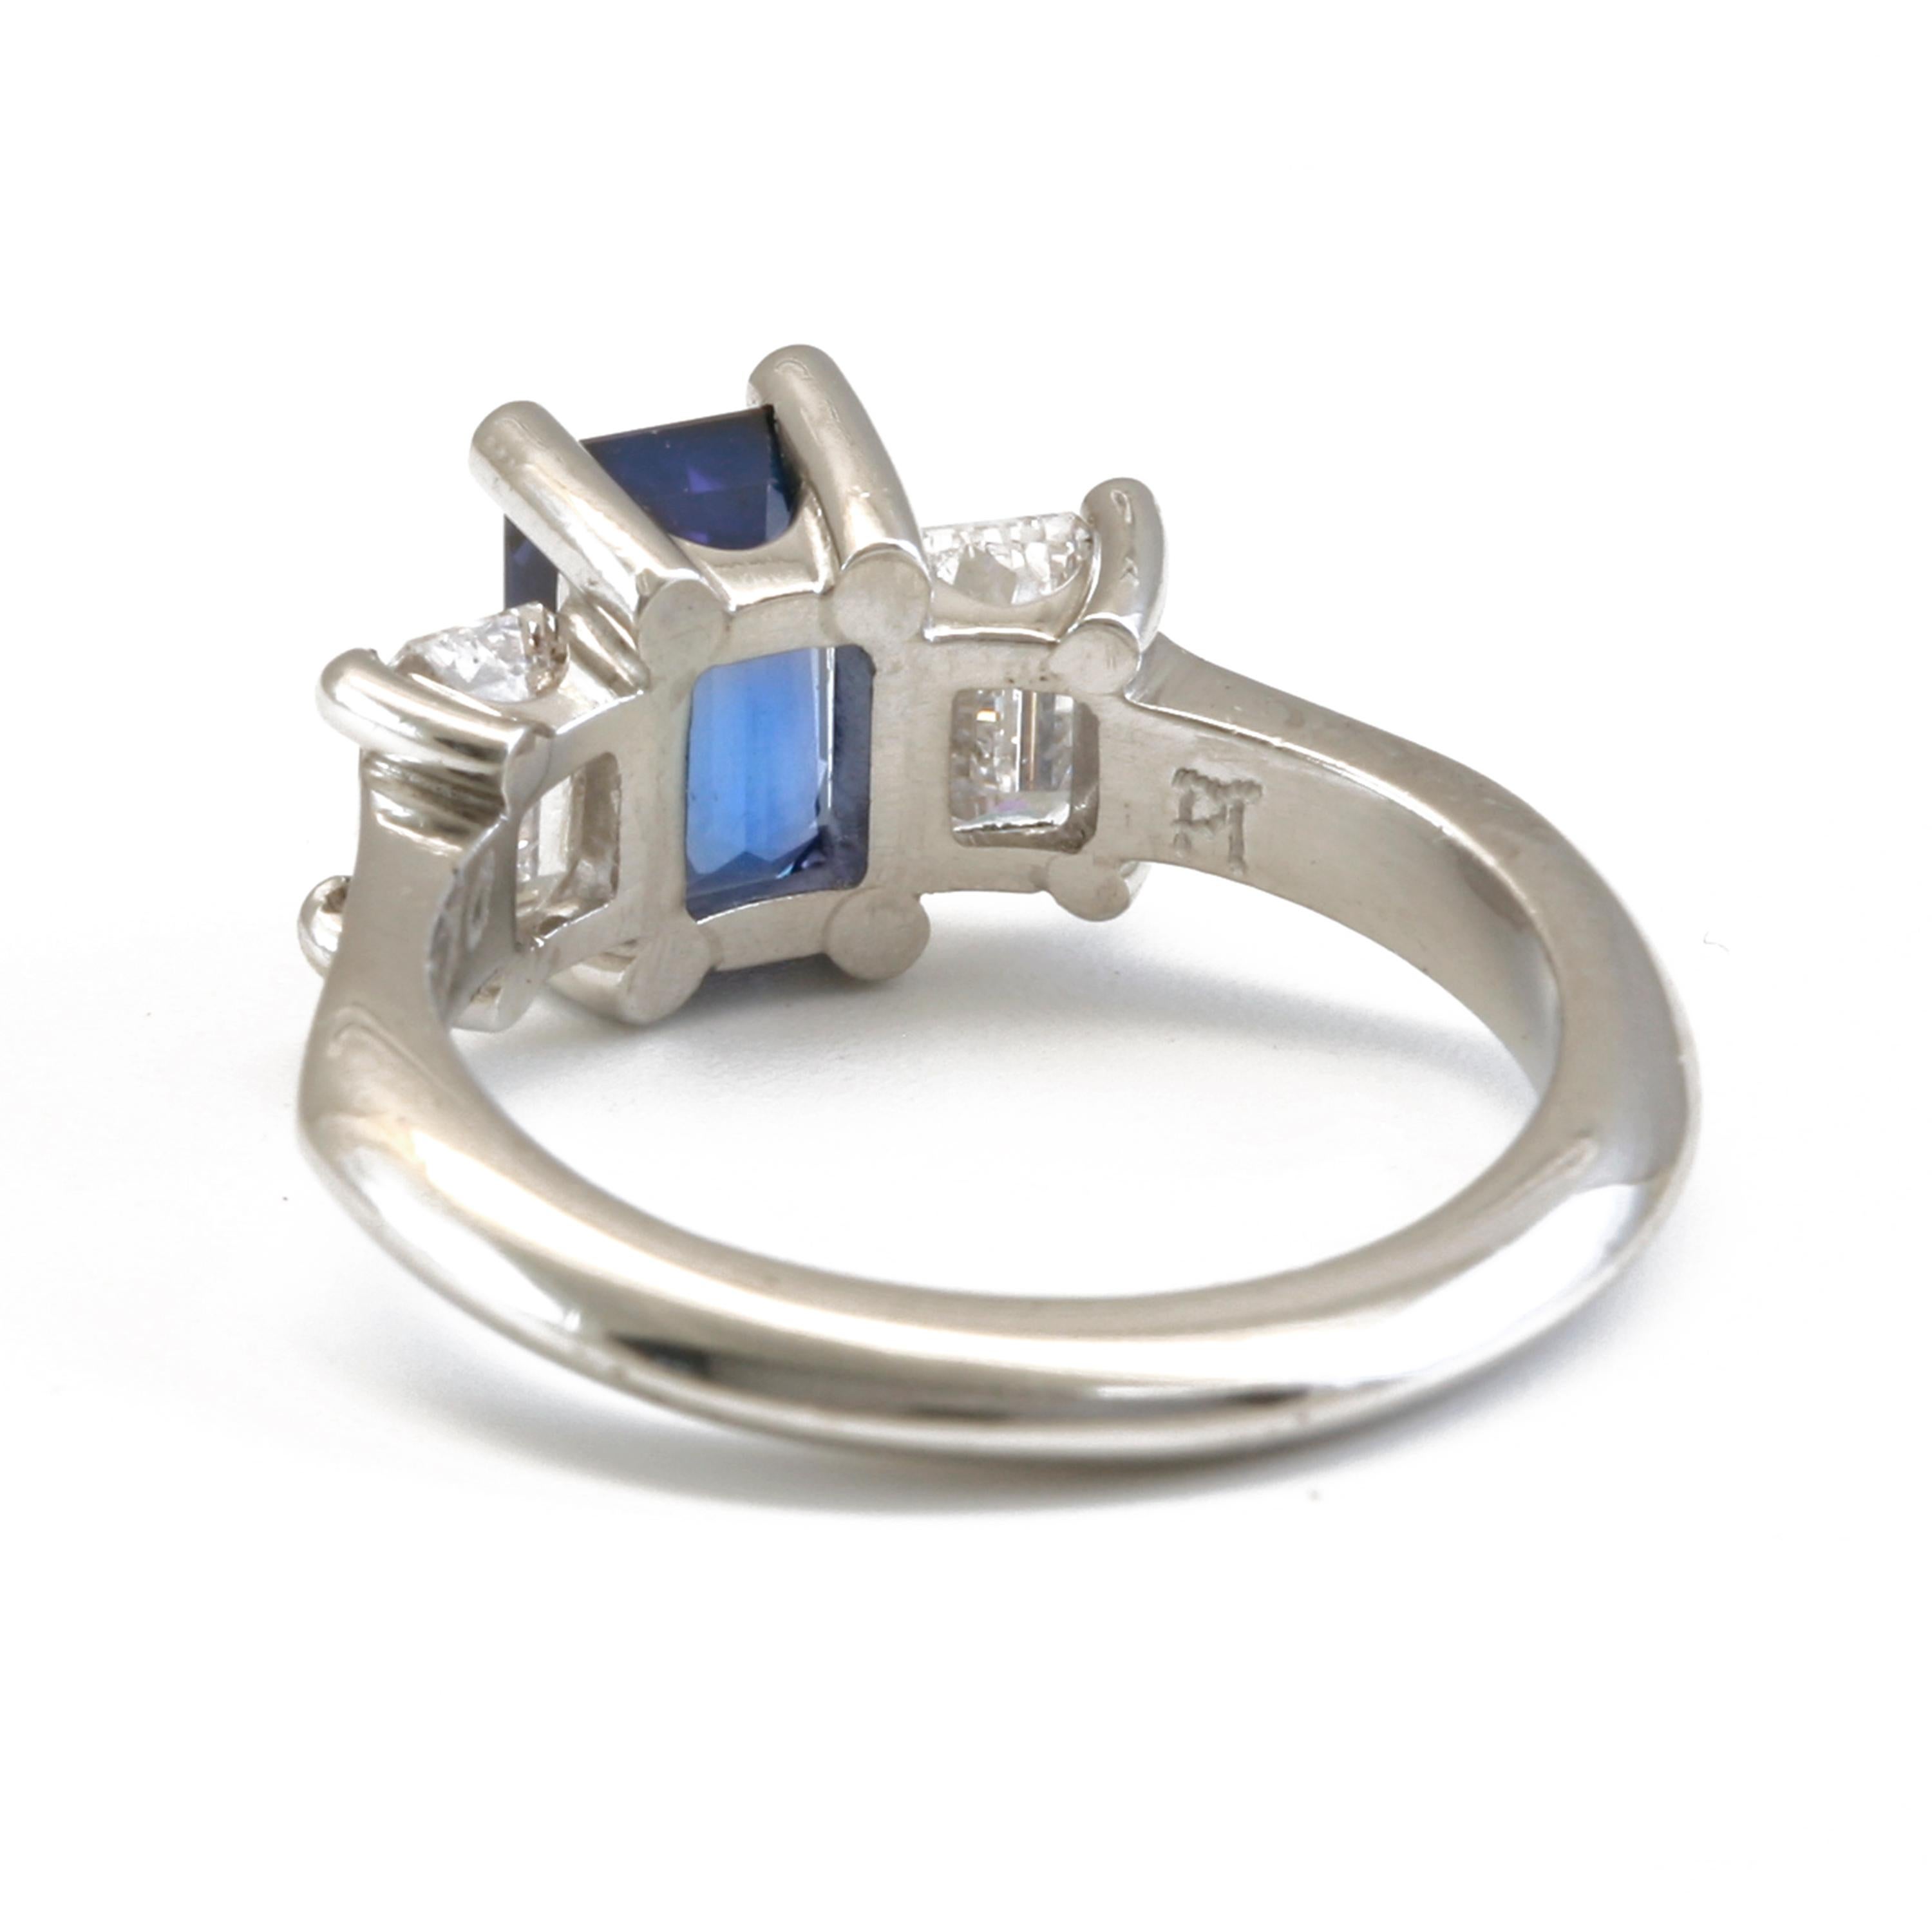 Diana Kim England Emerald Cut Ceylon Blue Sapphire and Diamond Ring in Platinum In New Condition For Sale In Red Hook, NY